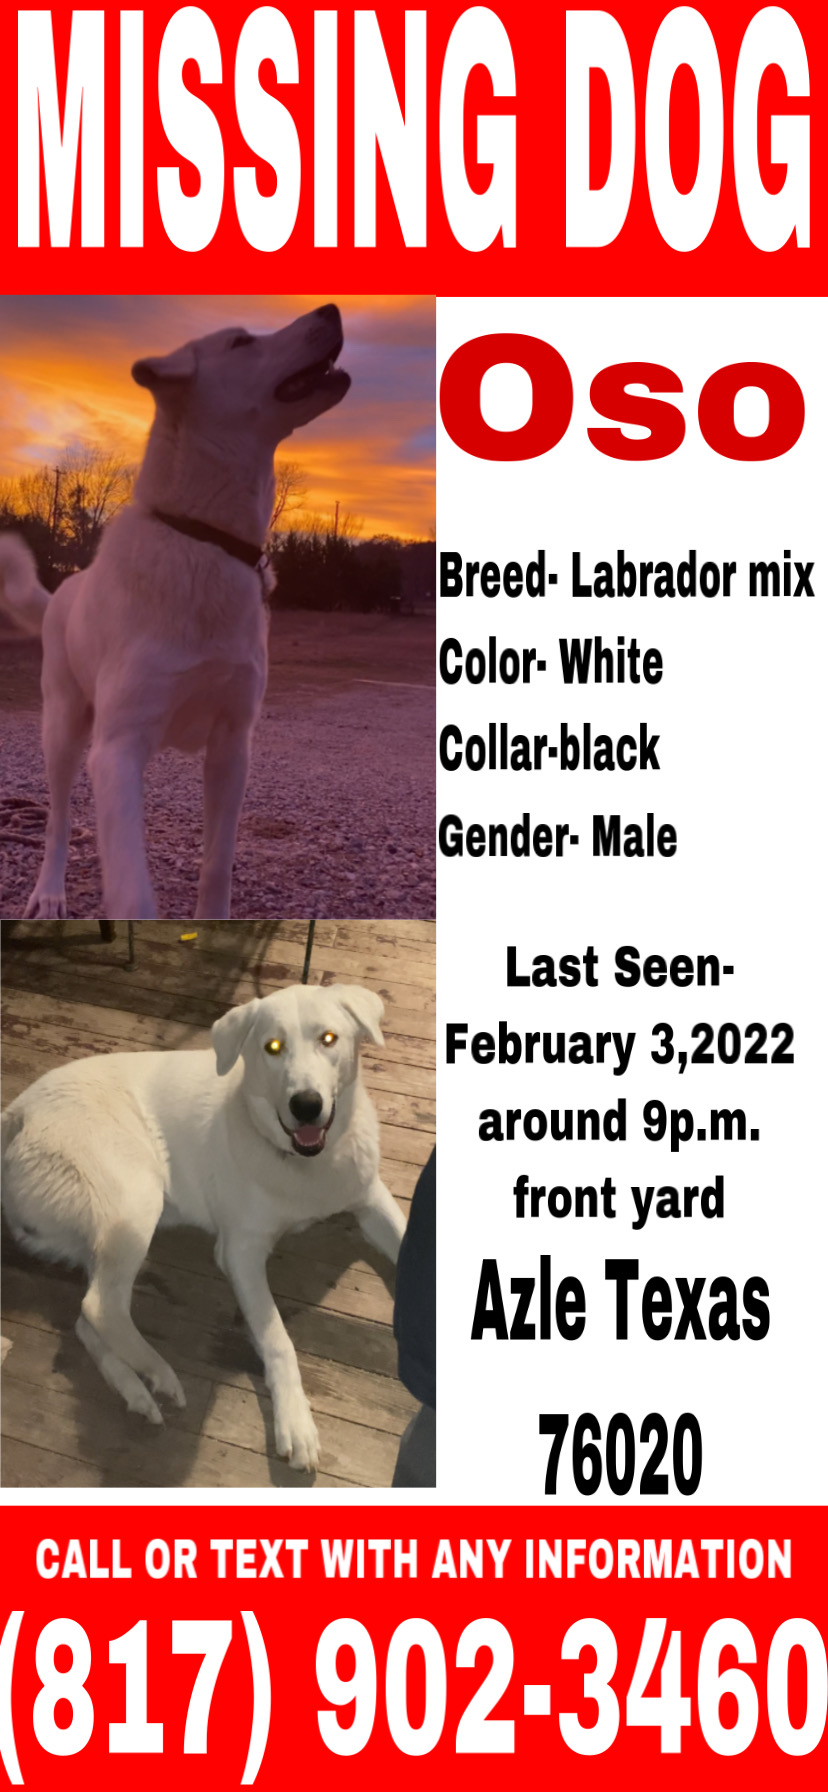 Image of oso, Lost Dog